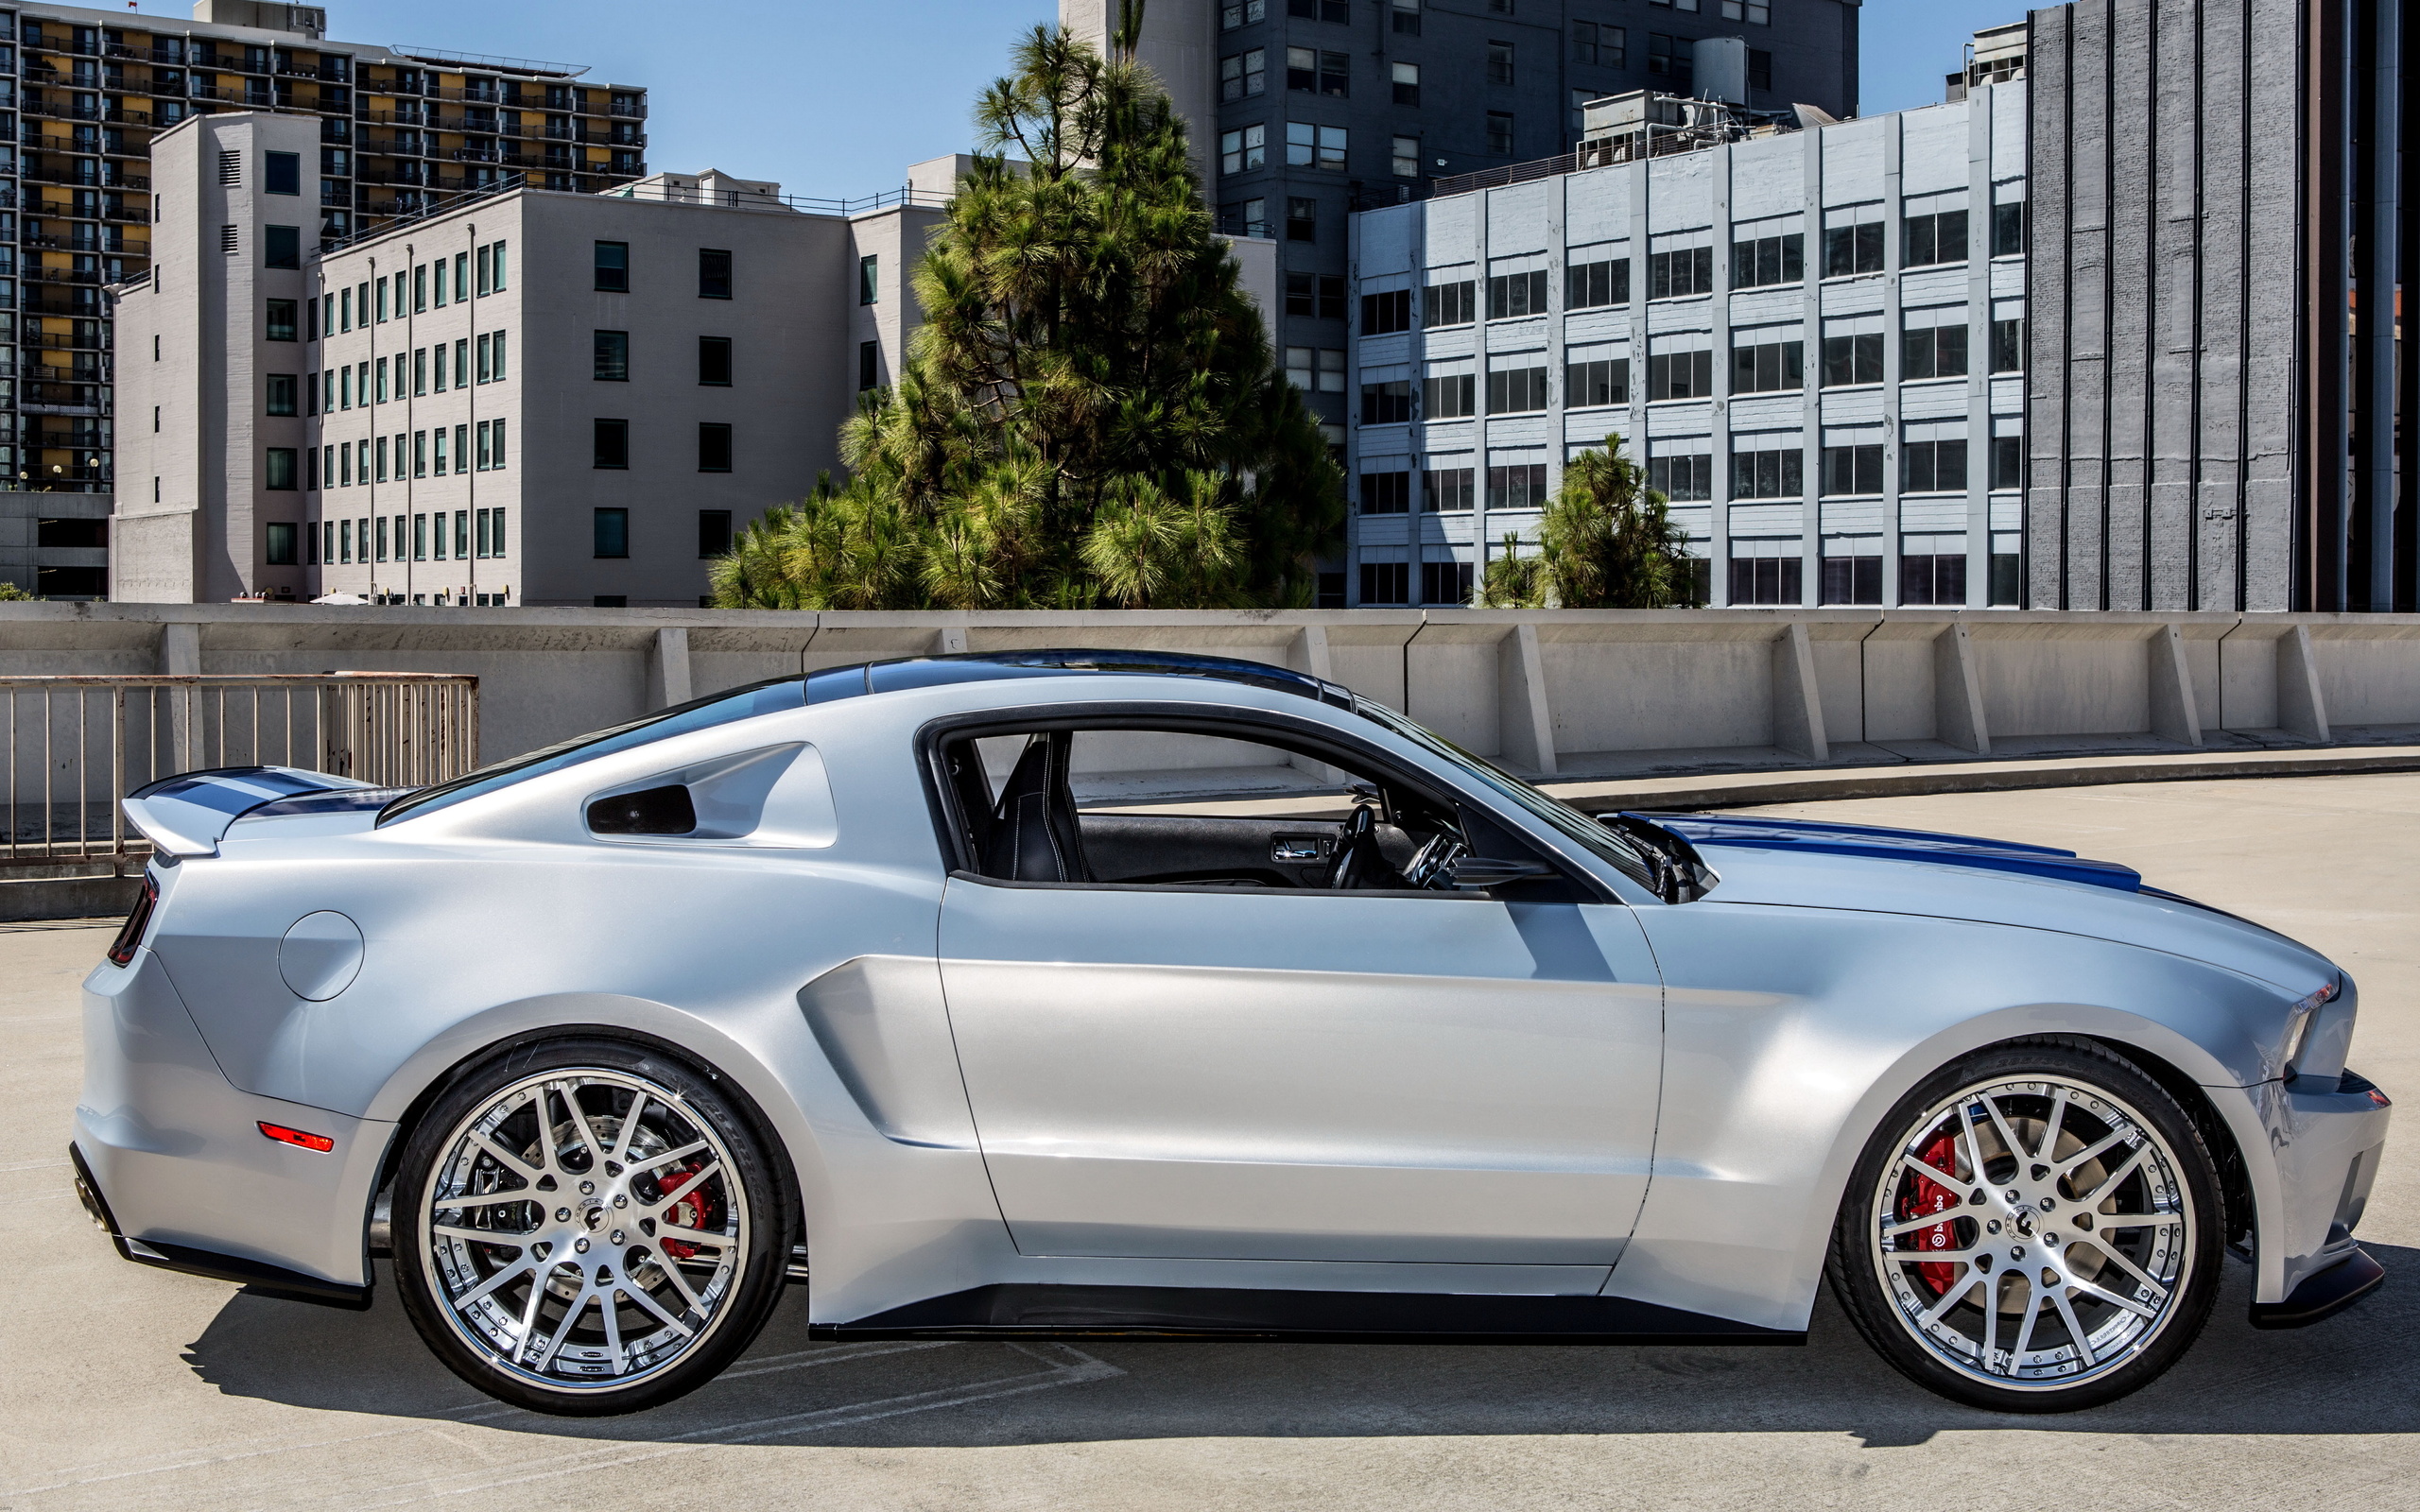 ford, Mustang, Tuning, Widebody, Nfs, Stripes, Front, Muscle, Wheel, Wheels Wallpaper HD / Desktop and Mobile Background